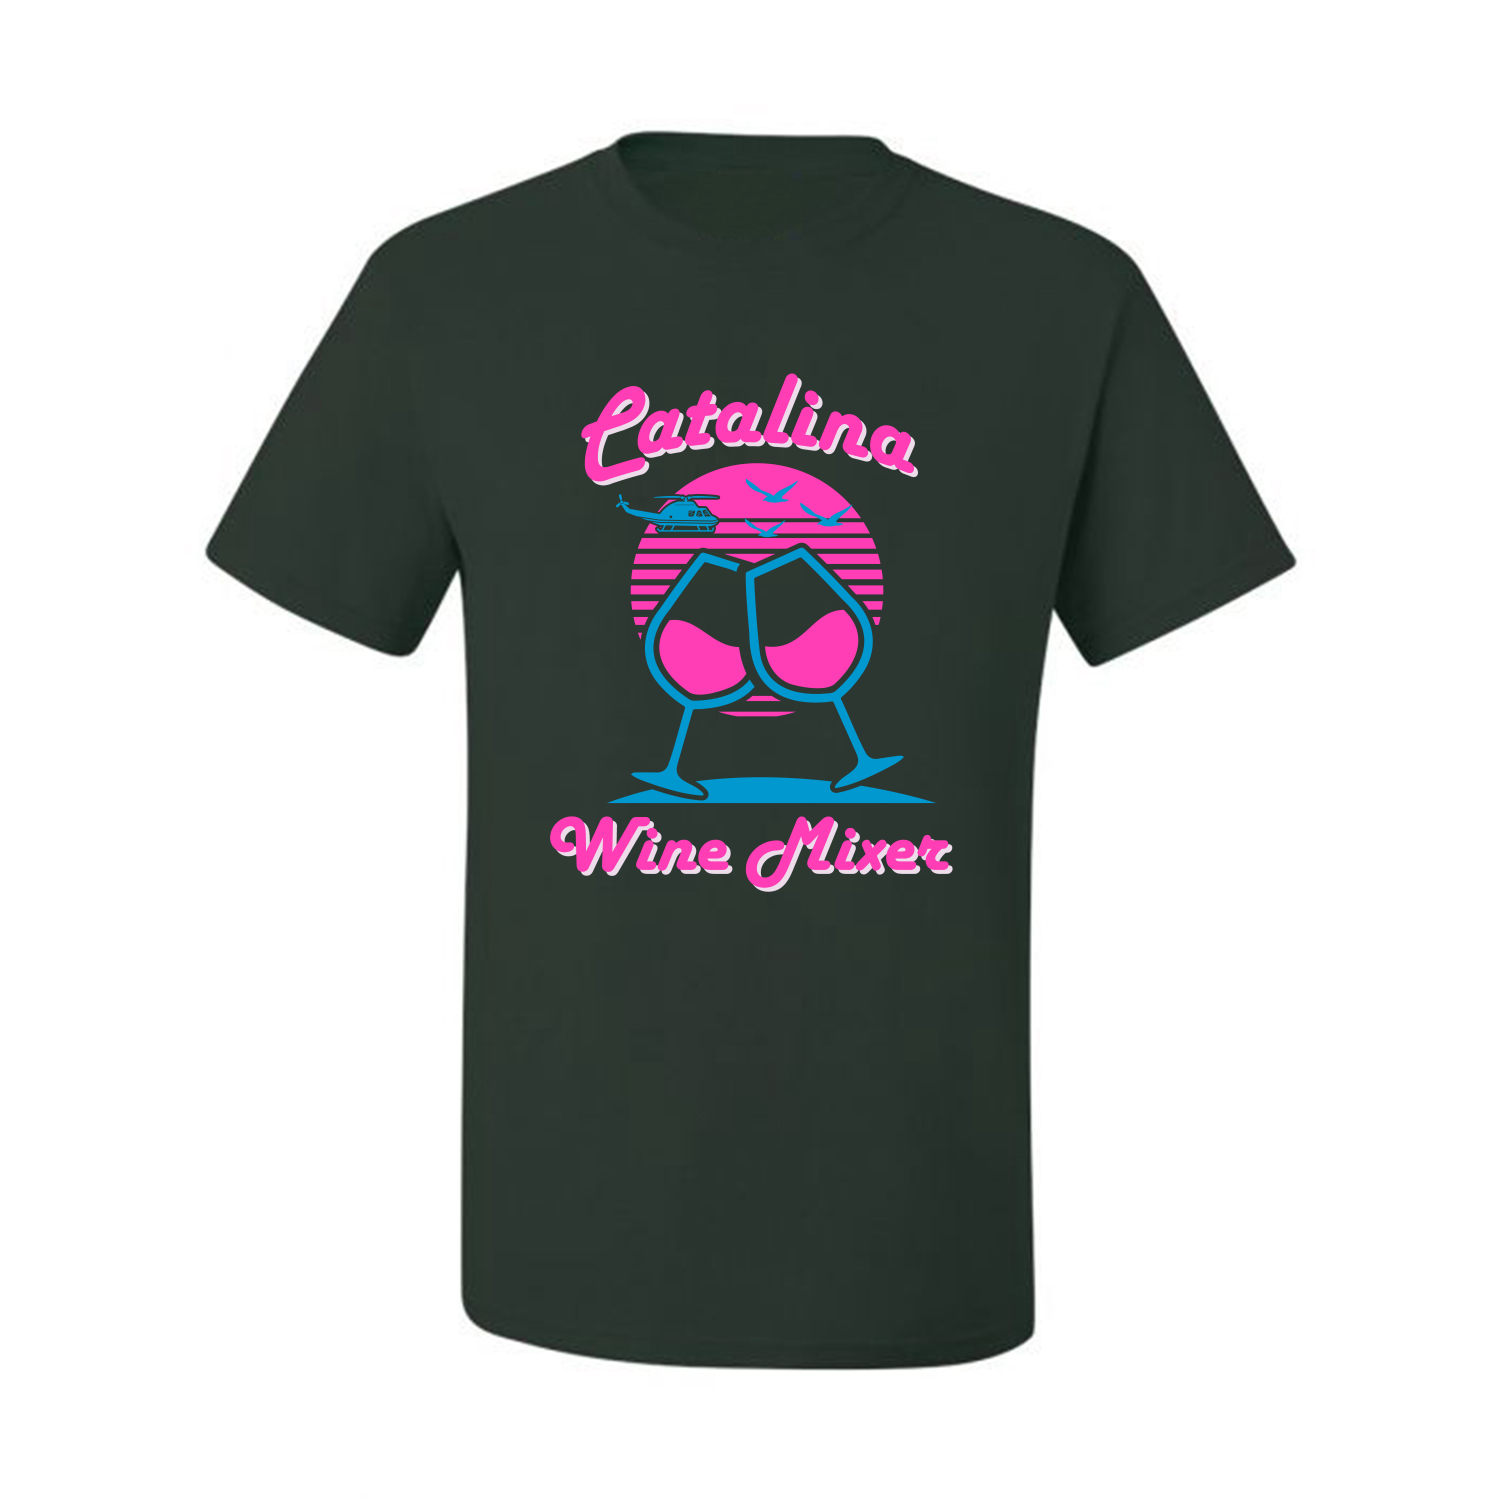 Catalina Wine Mixer Island Prestige Movie| Mens Pop Culture Graphic T-Shirt, Forest Green, X-Large - image 2 of 4